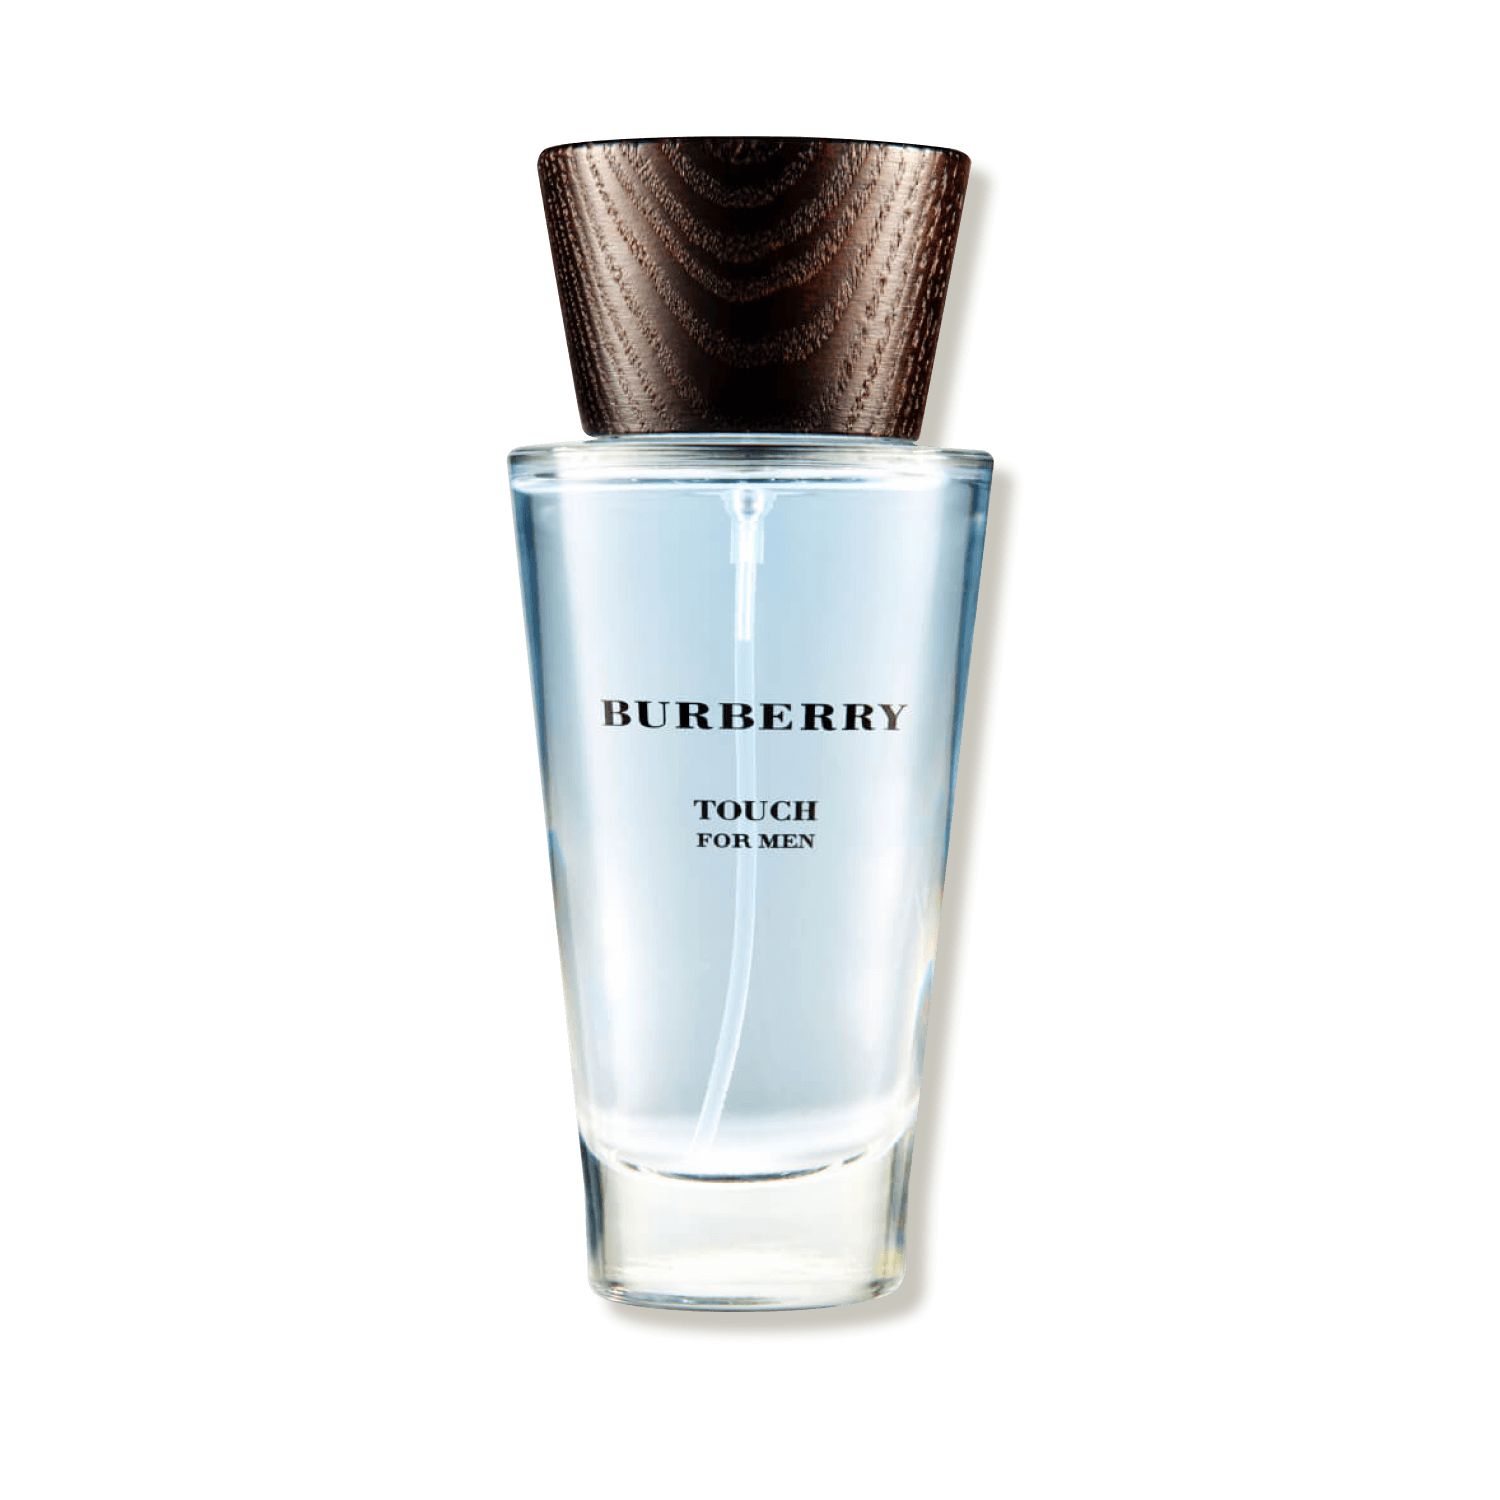 Buy BURBERRY Burberry Touch for Men for at Scentbird